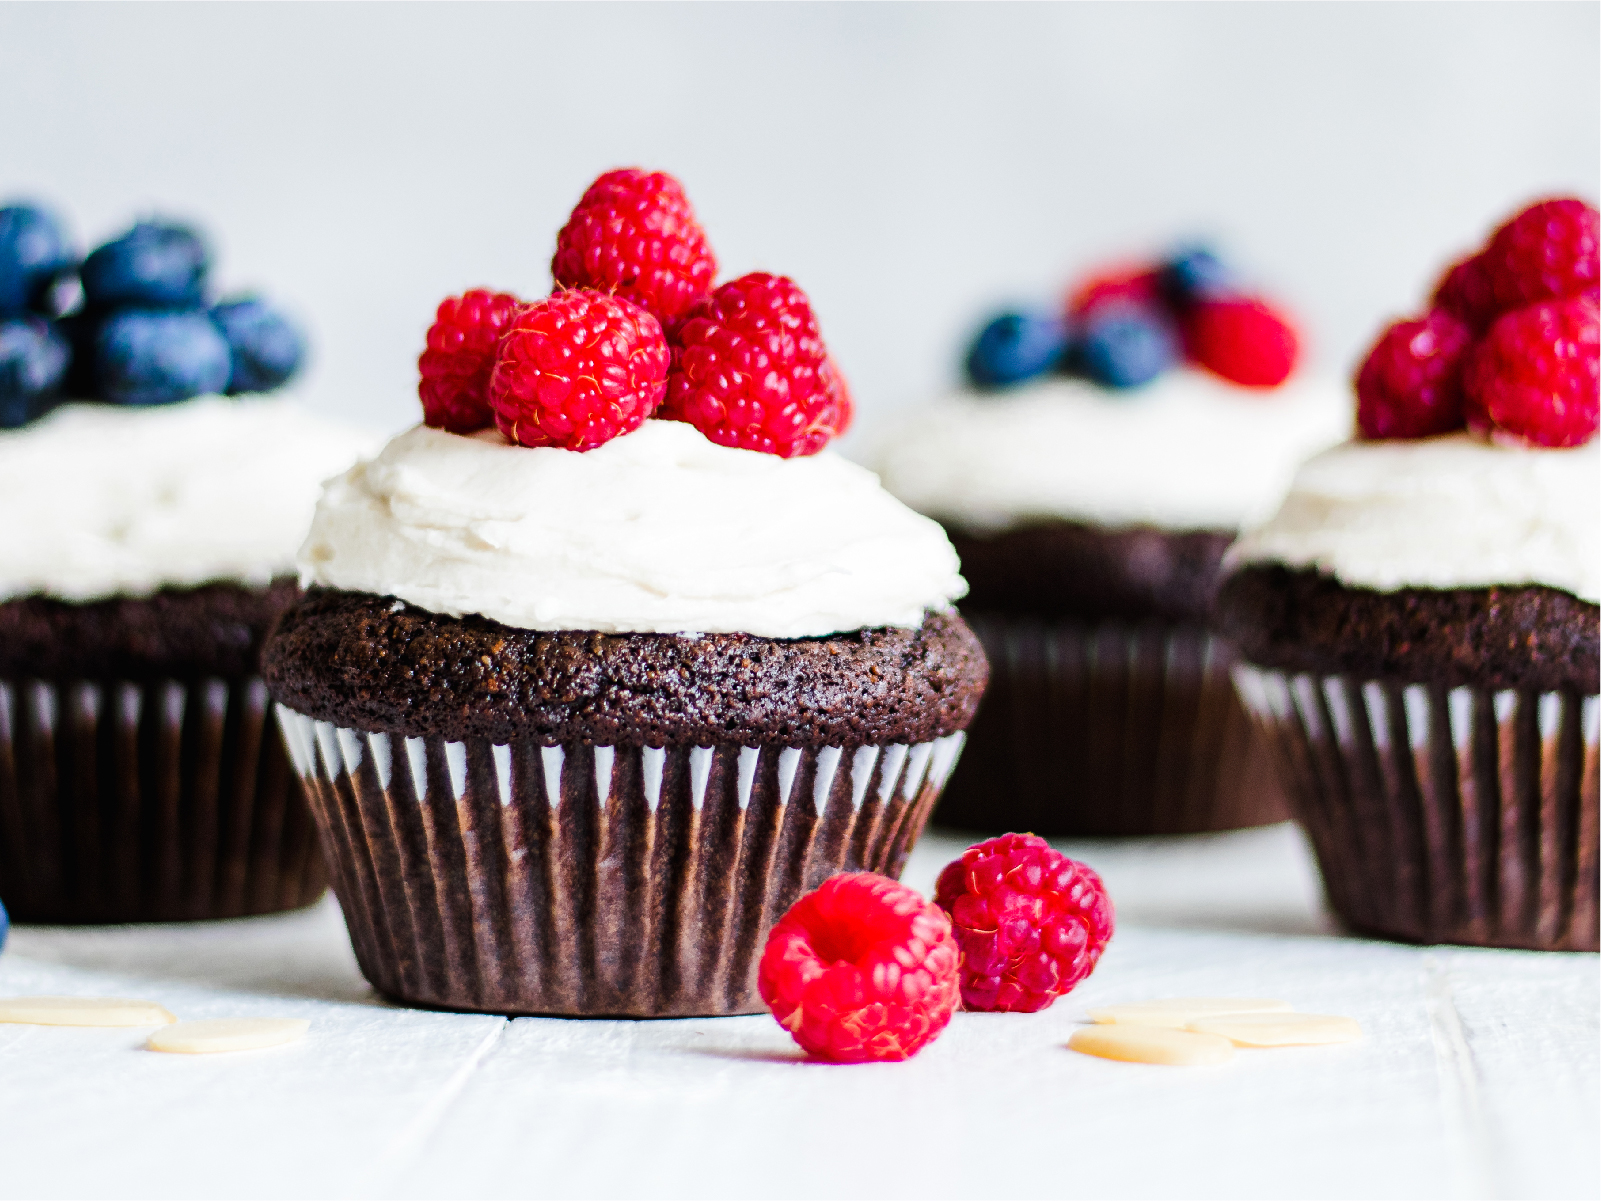 Chocolate cupcakes with white frosting, blueberries and rasberries on top